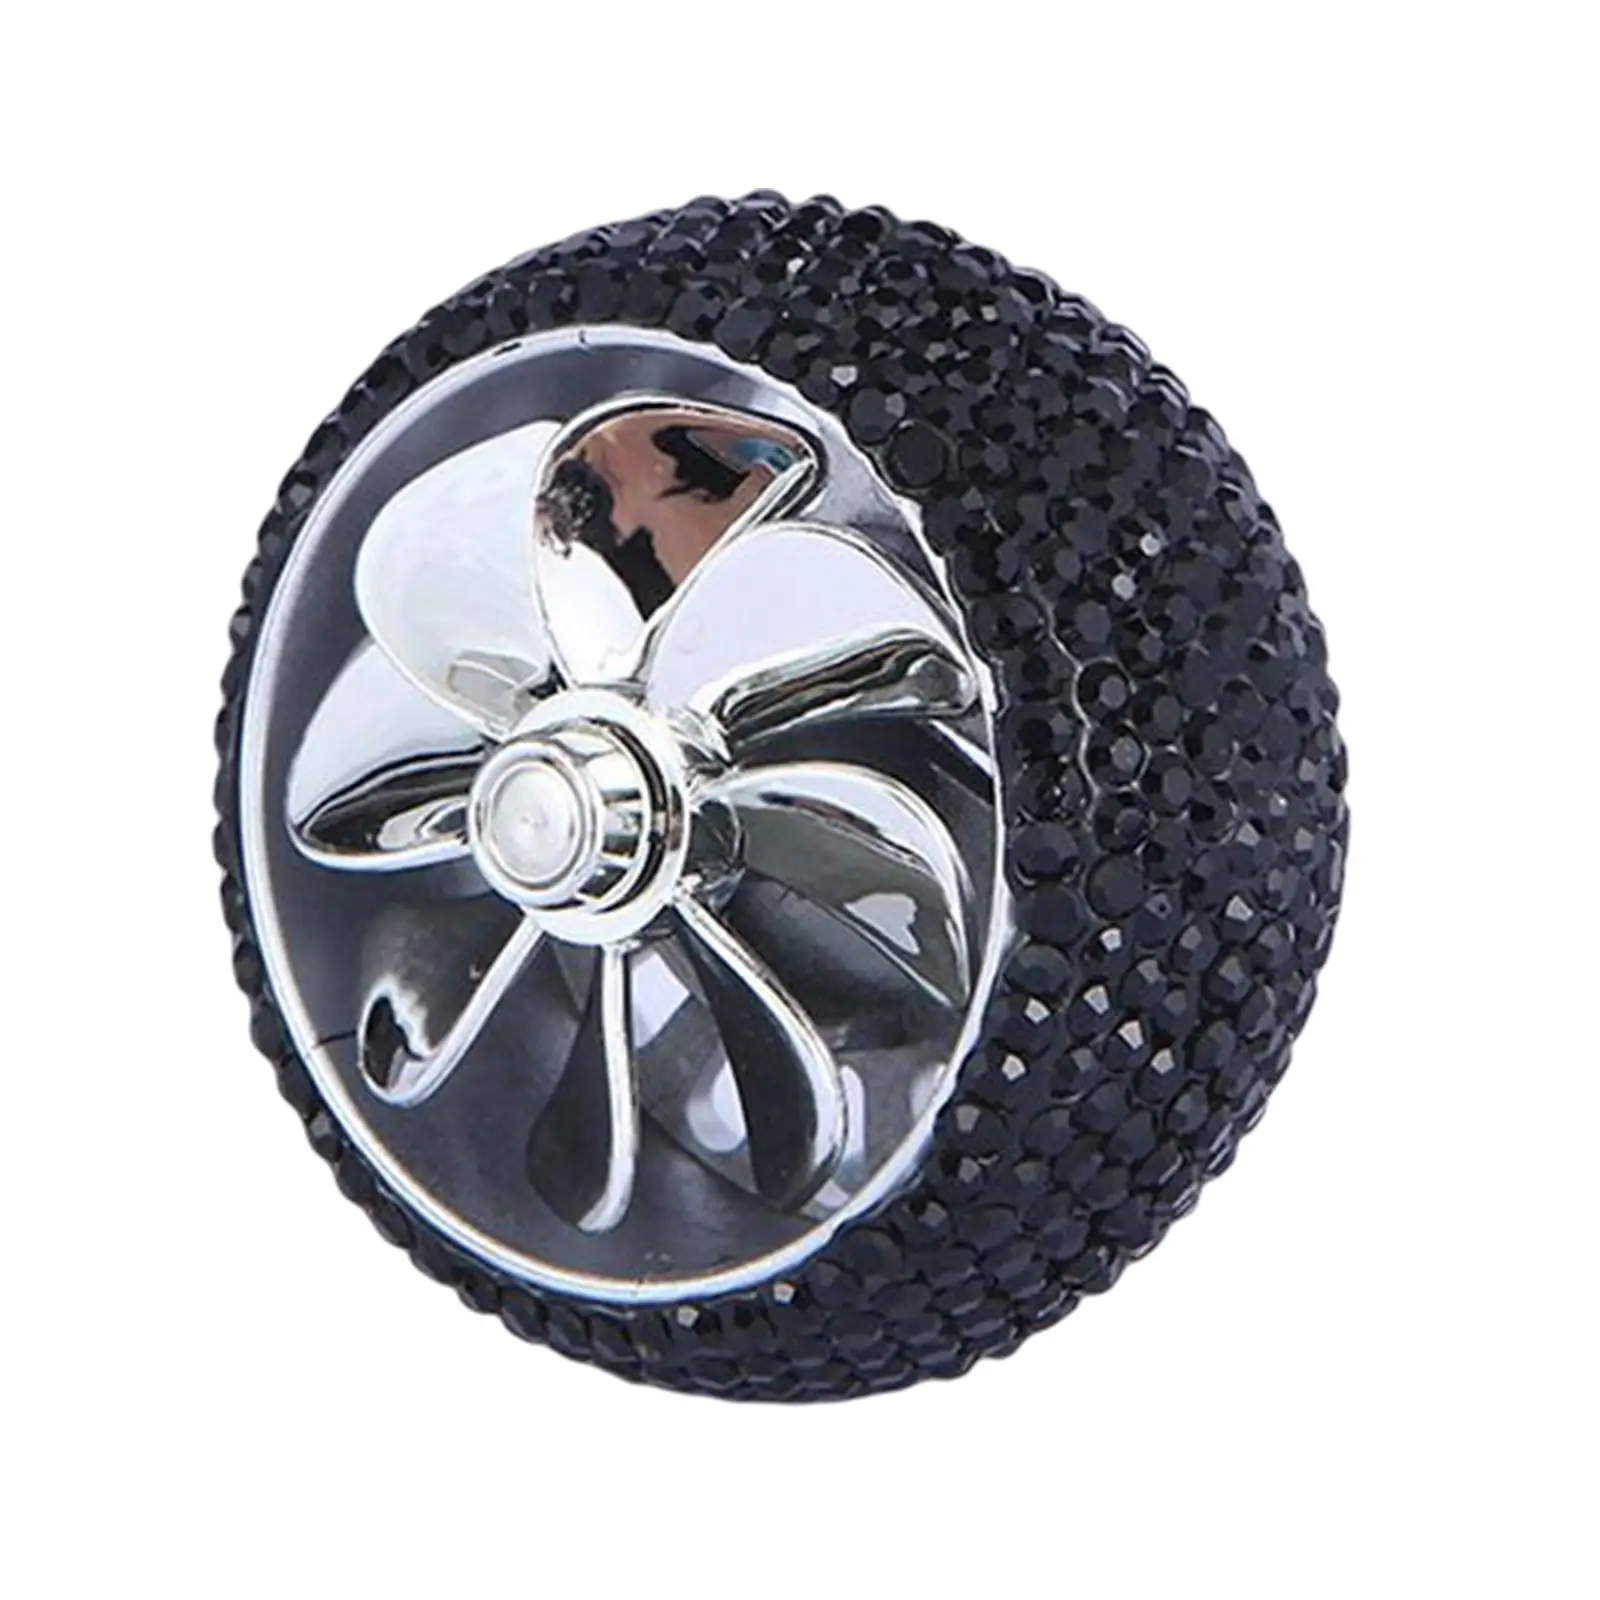 Air Vent Fan Diffuser Gift Decoration Accessories Car Air Outlet Clip